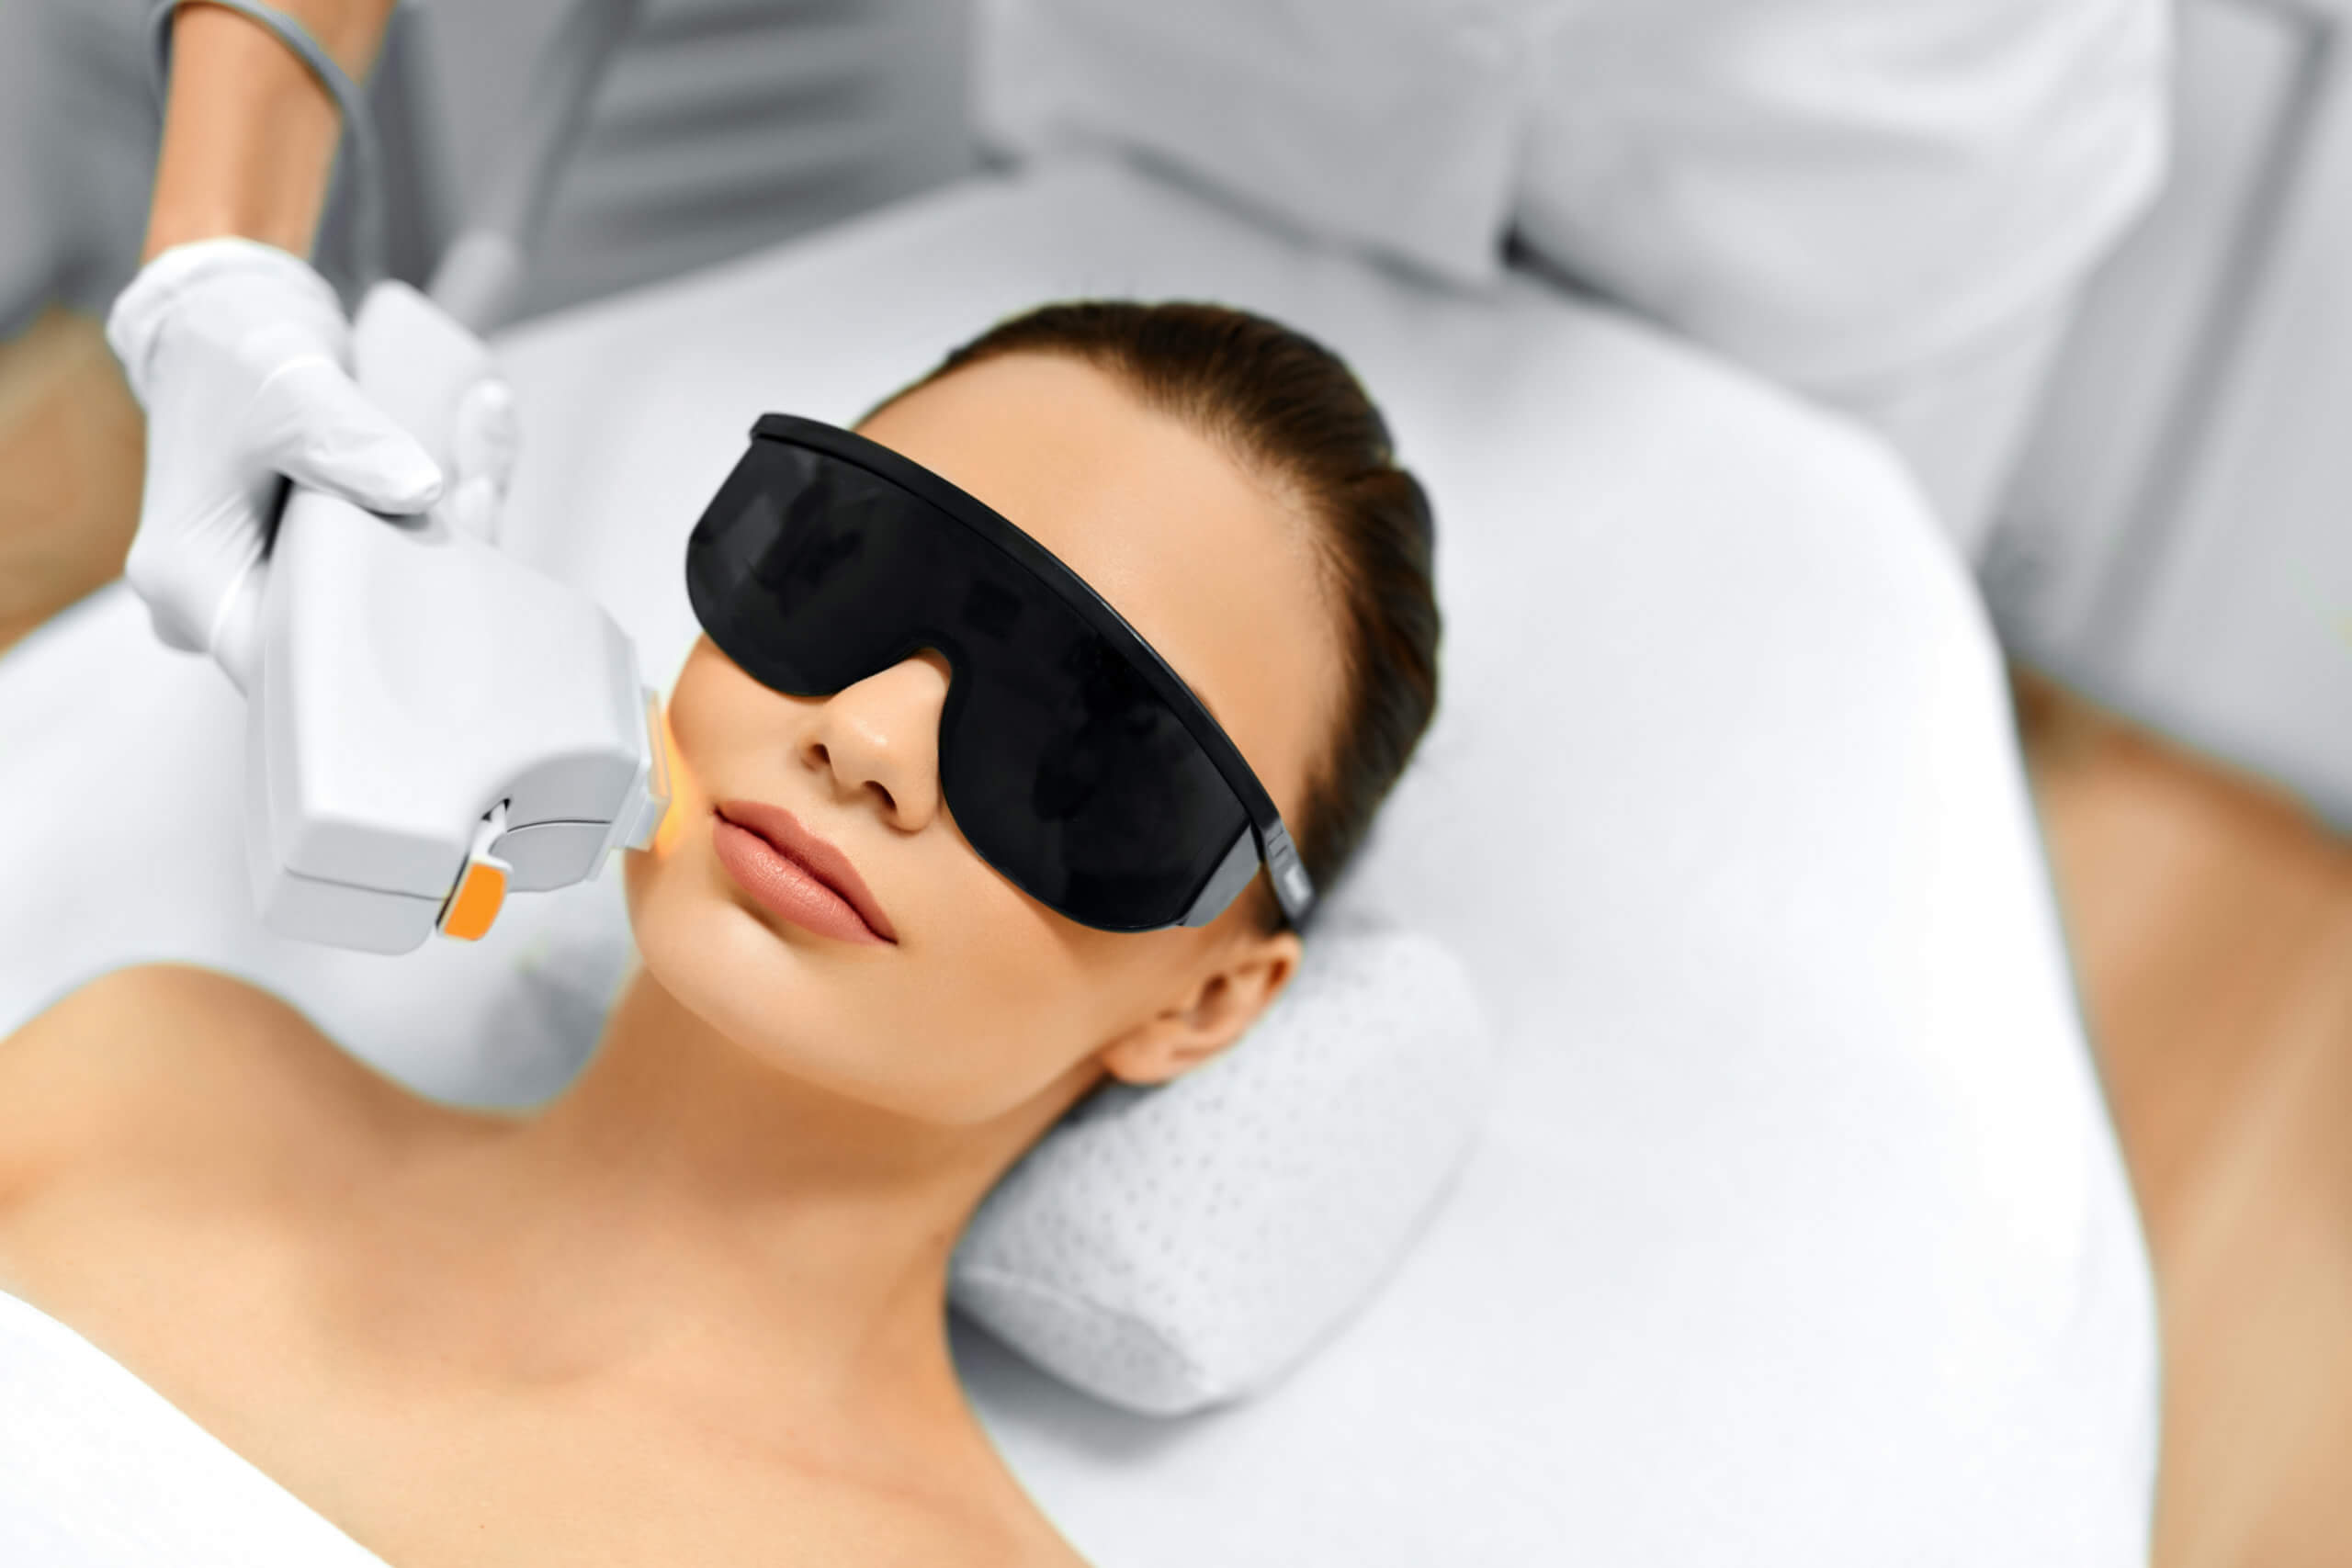 Intense Pulsed Light (IPL) Treatment Uses And What To Expect